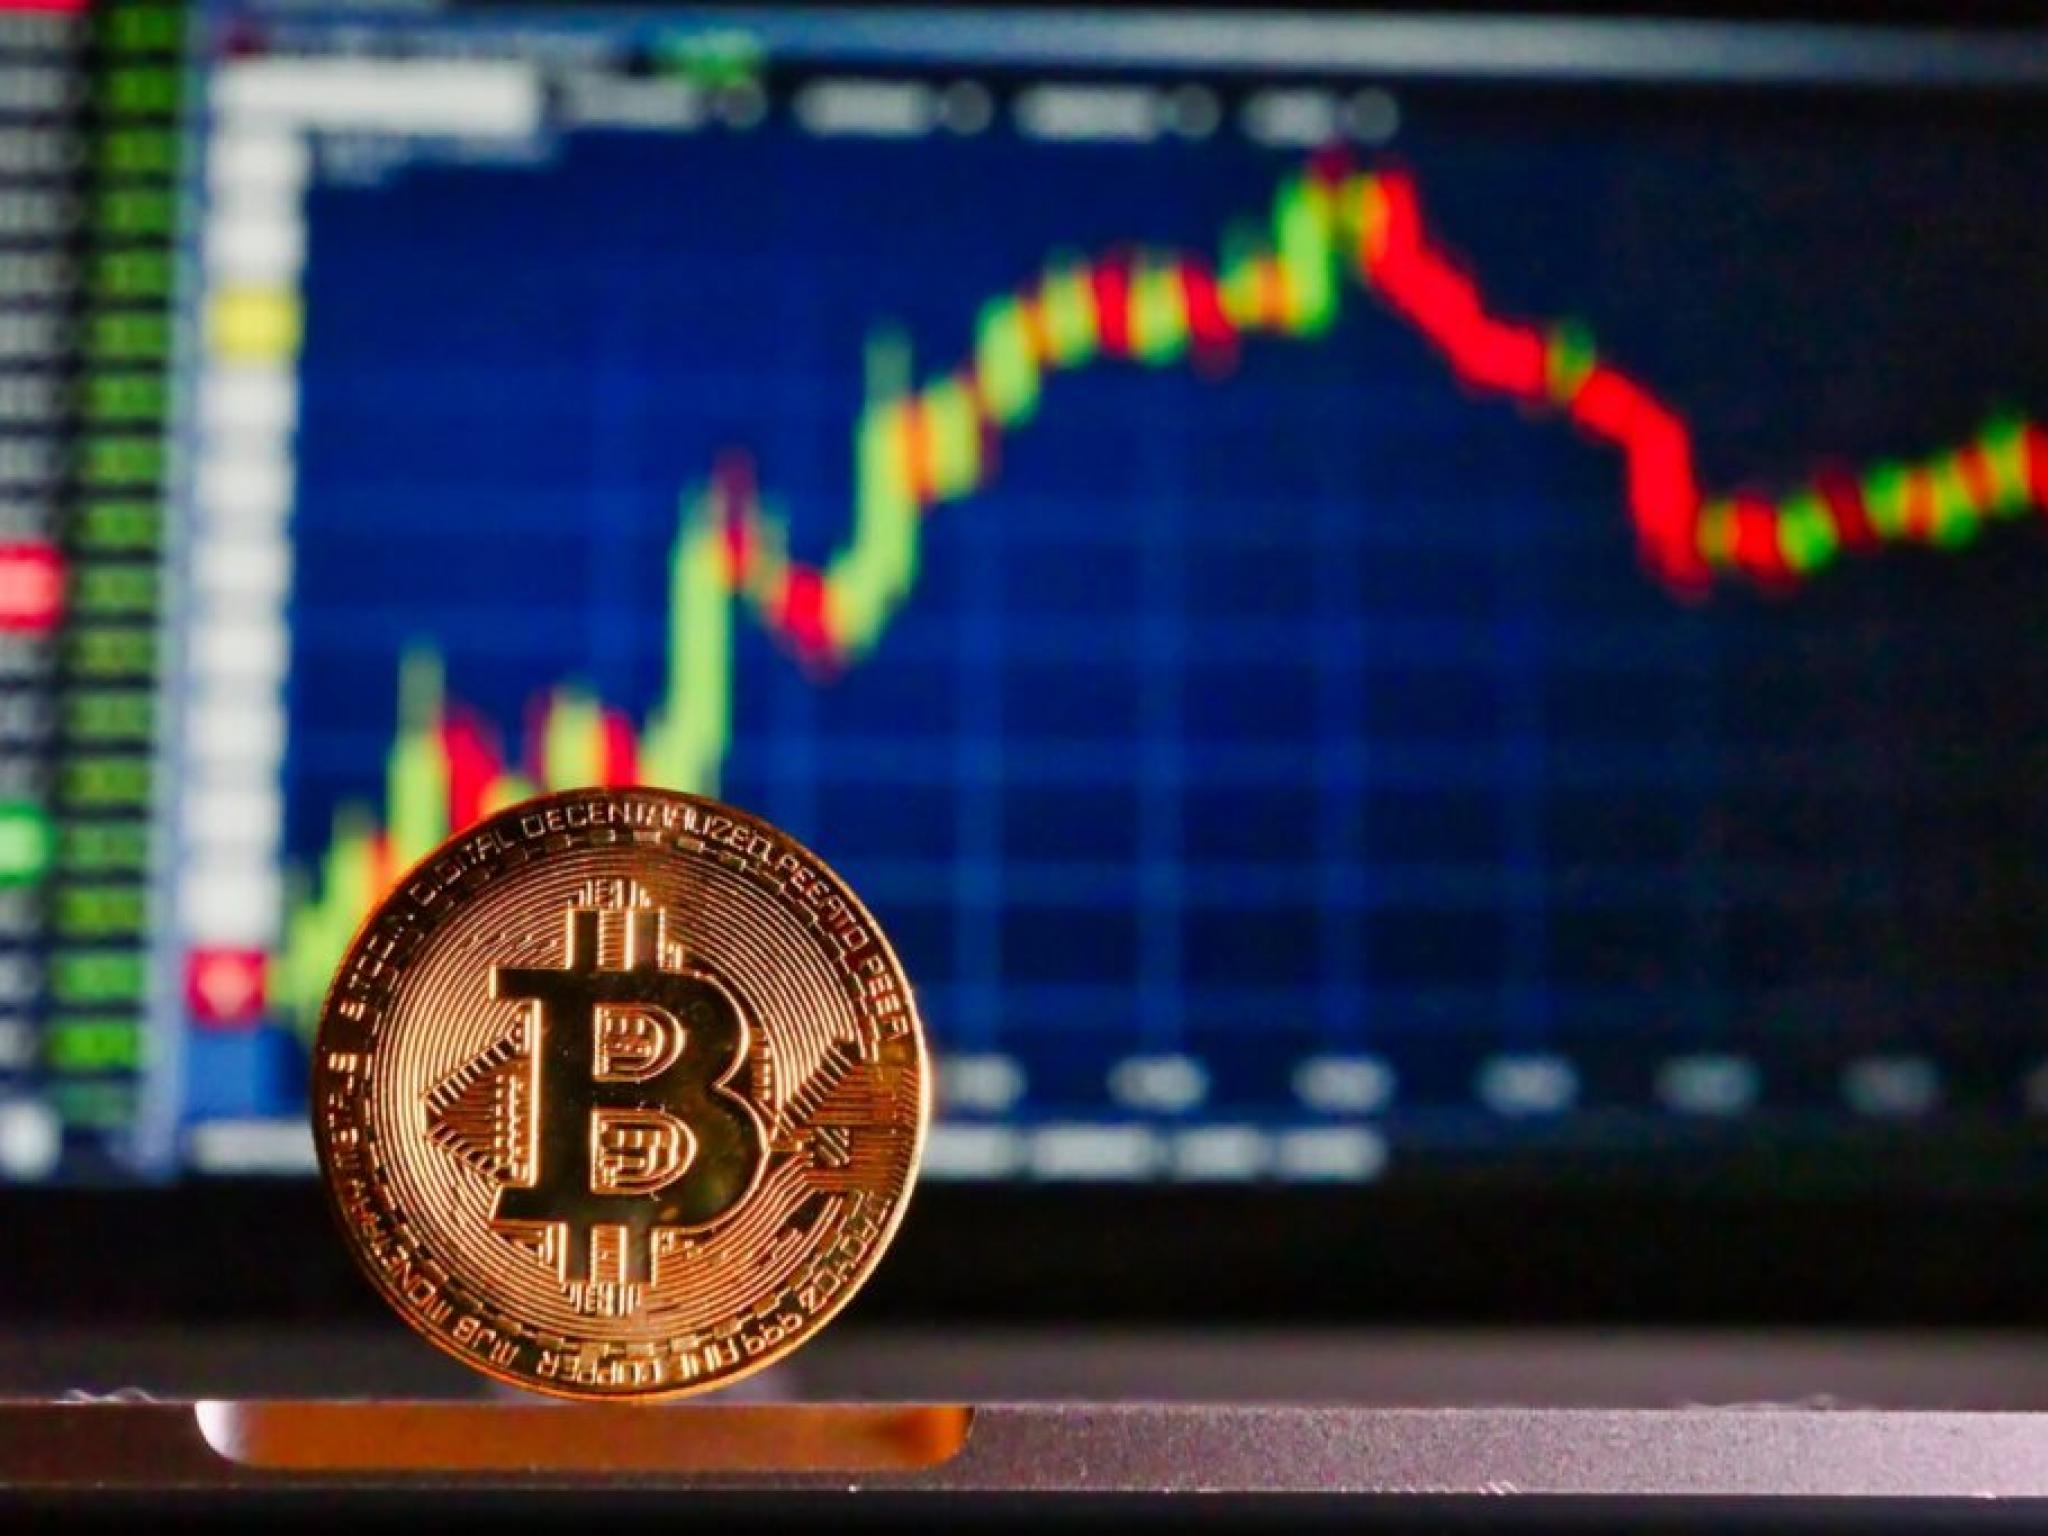  bitcoins-price-rebound-triggers-rally-in-crypto-linked-stocks-as-expert-highlights-very-bullish-long-term-outlook 